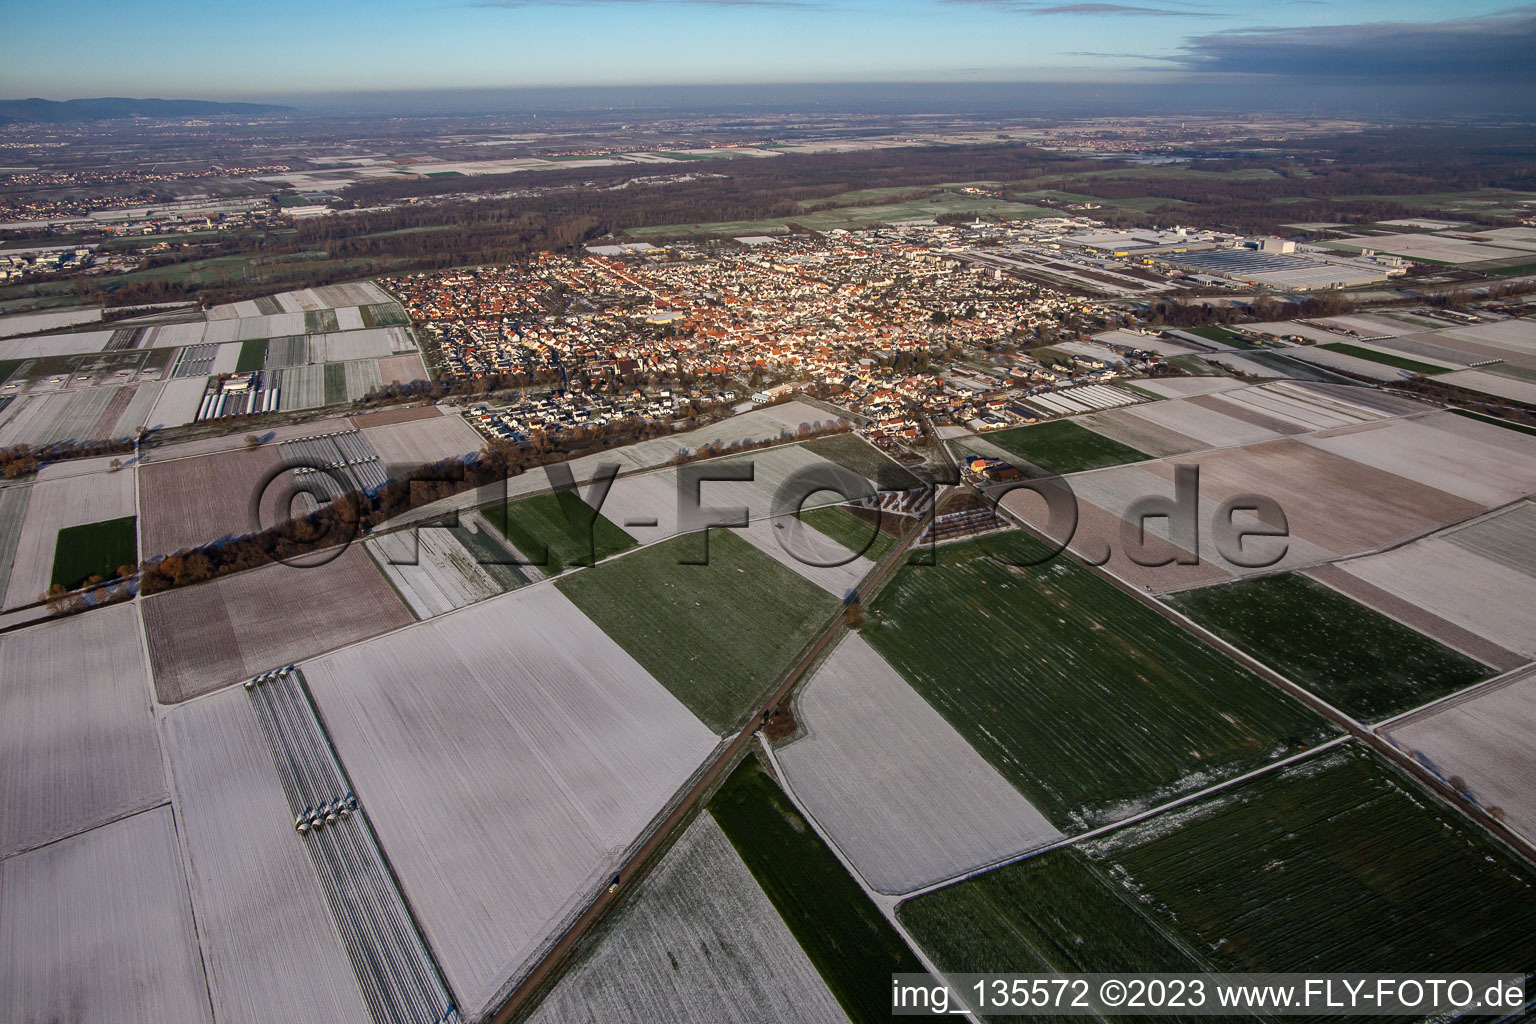 Aerial view of From the southwest in winter when there is snow in Offenbach an der Queich in the state Rhineland-Palatinate, Germany